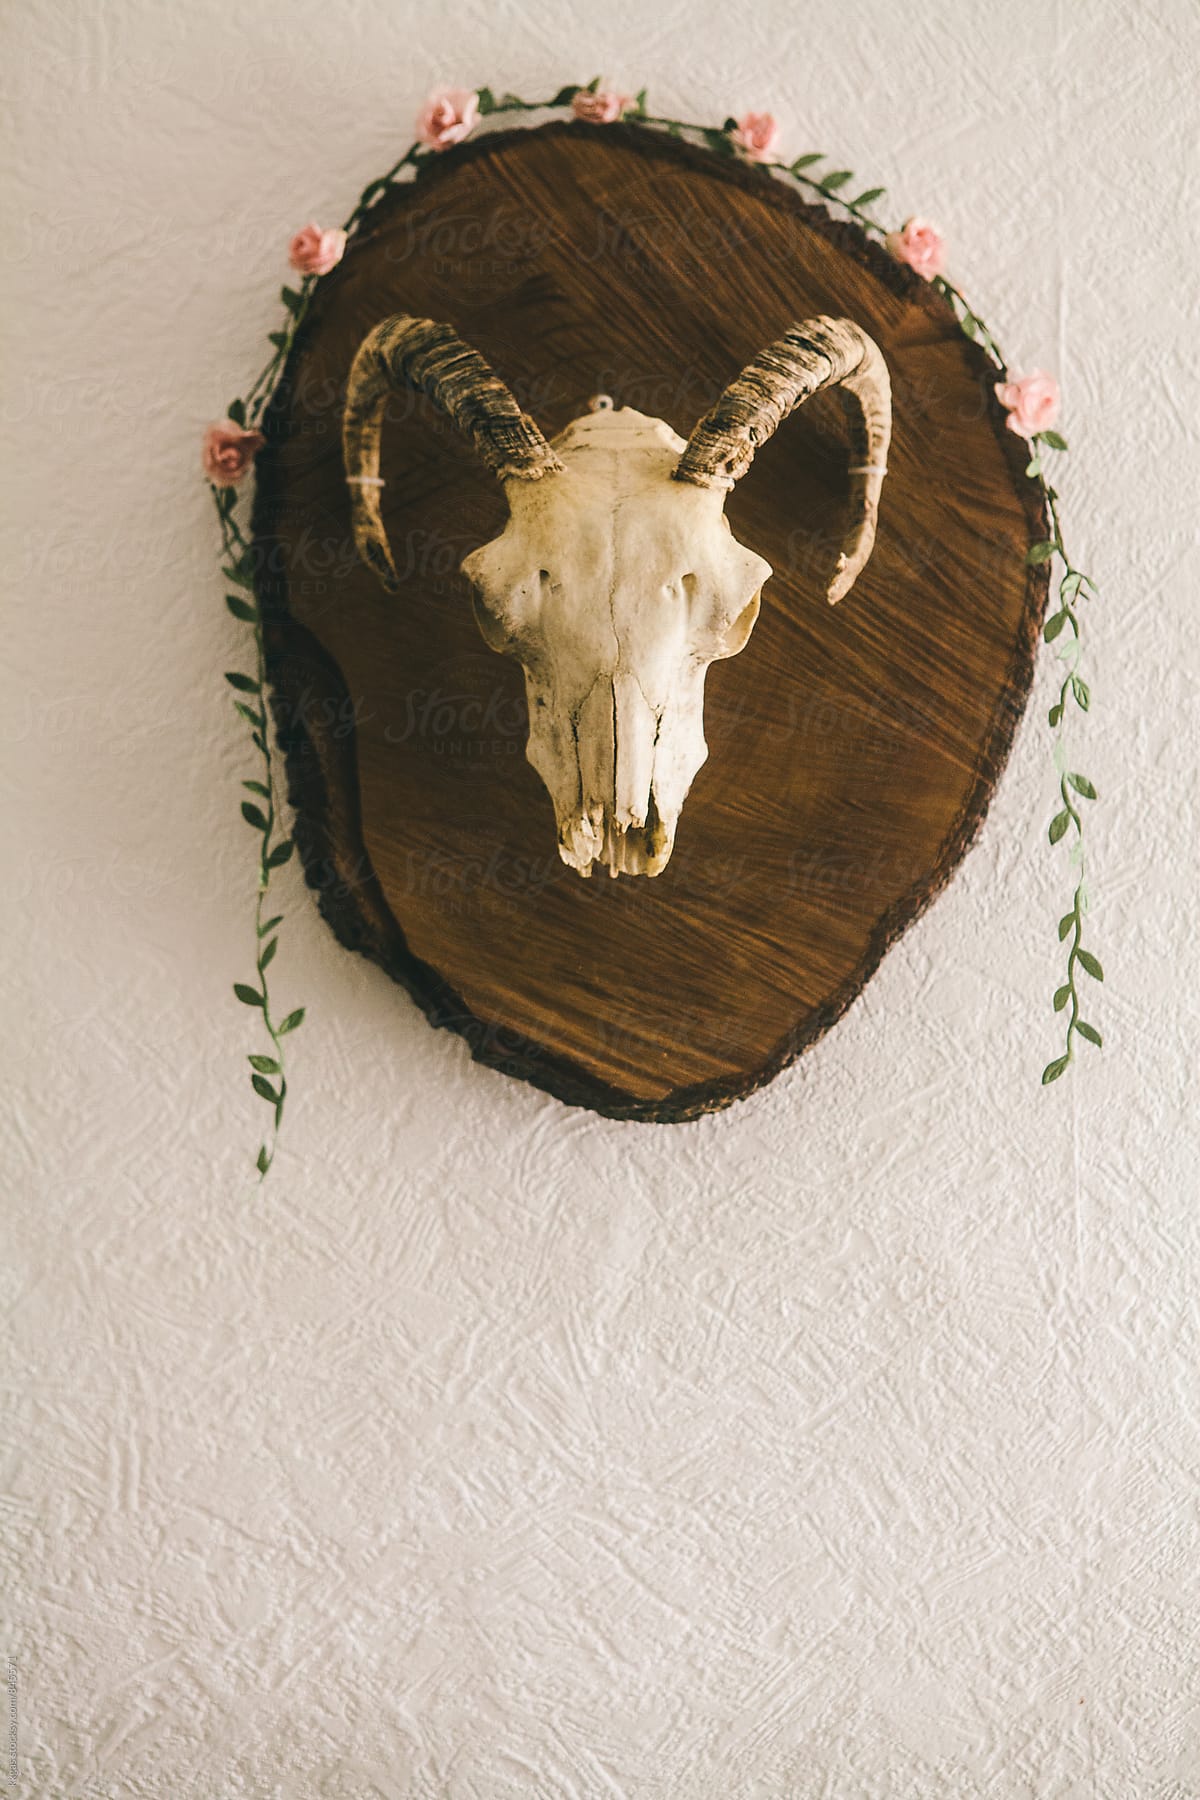 Ram skull mounted on wood with a flower garland.